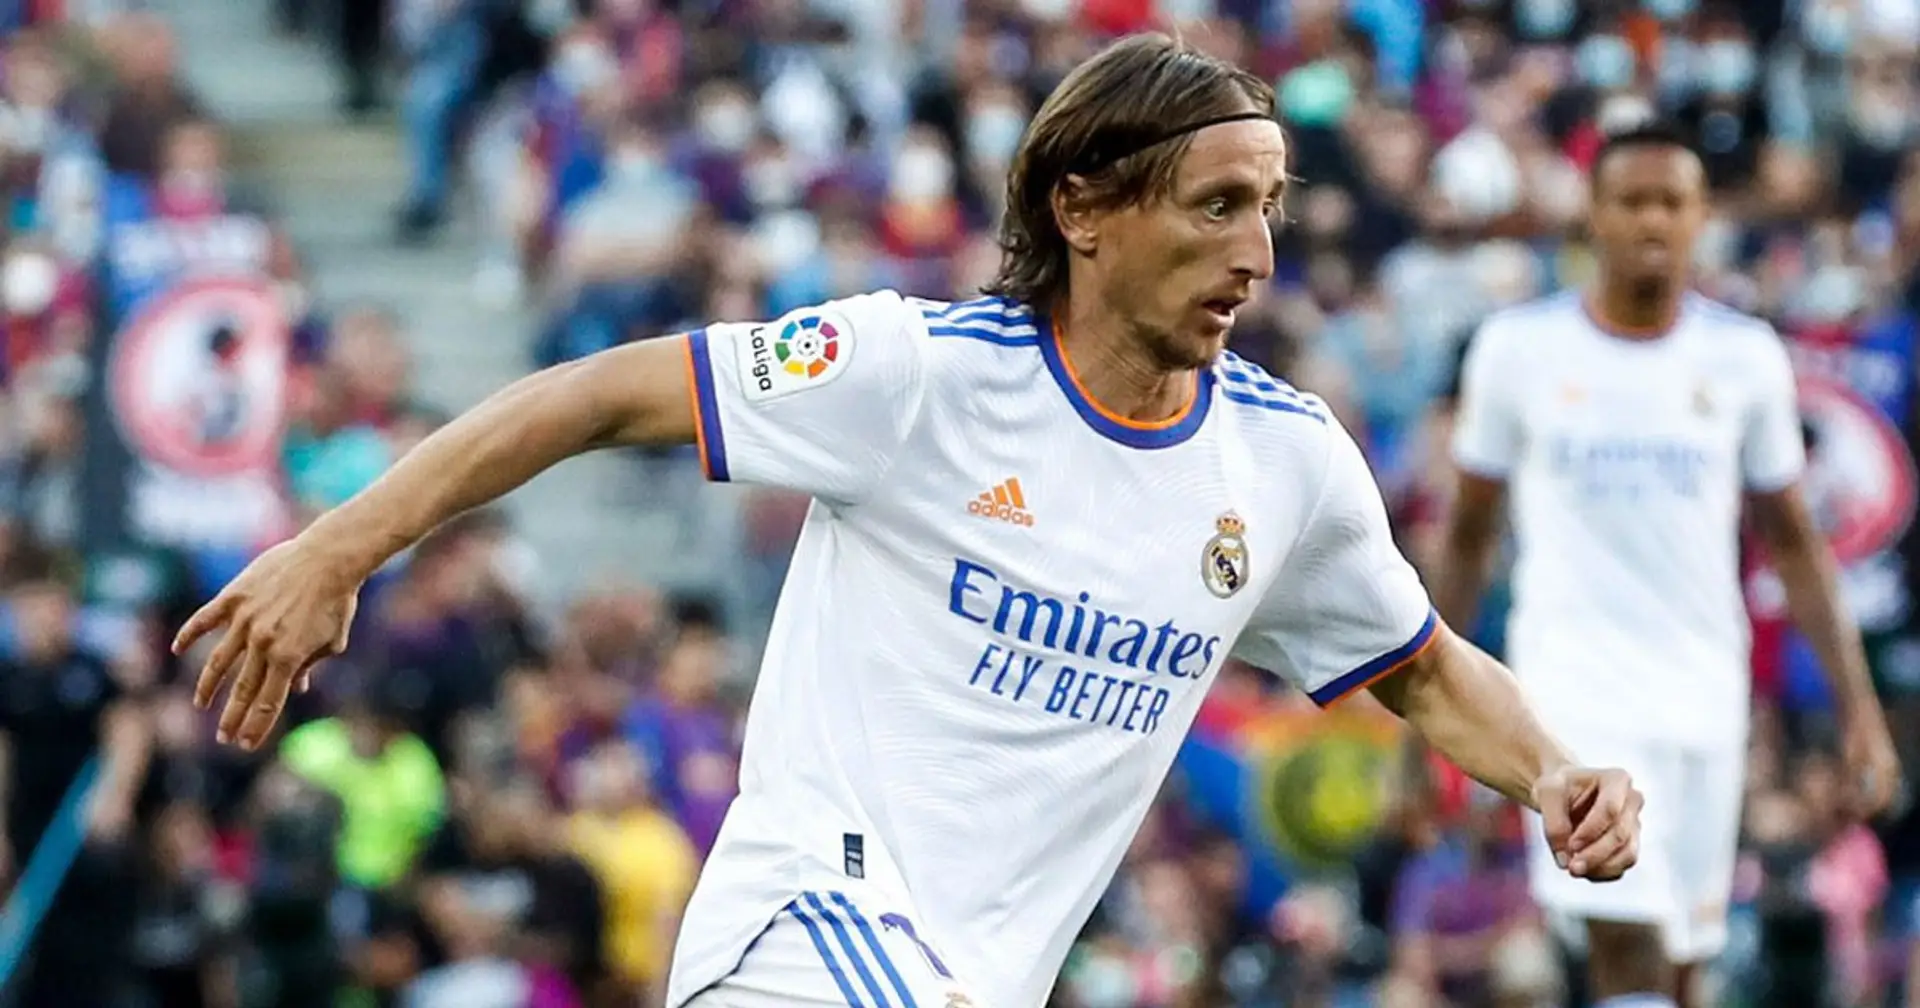 Modric expected to return to starting line-up in next game after injury scare